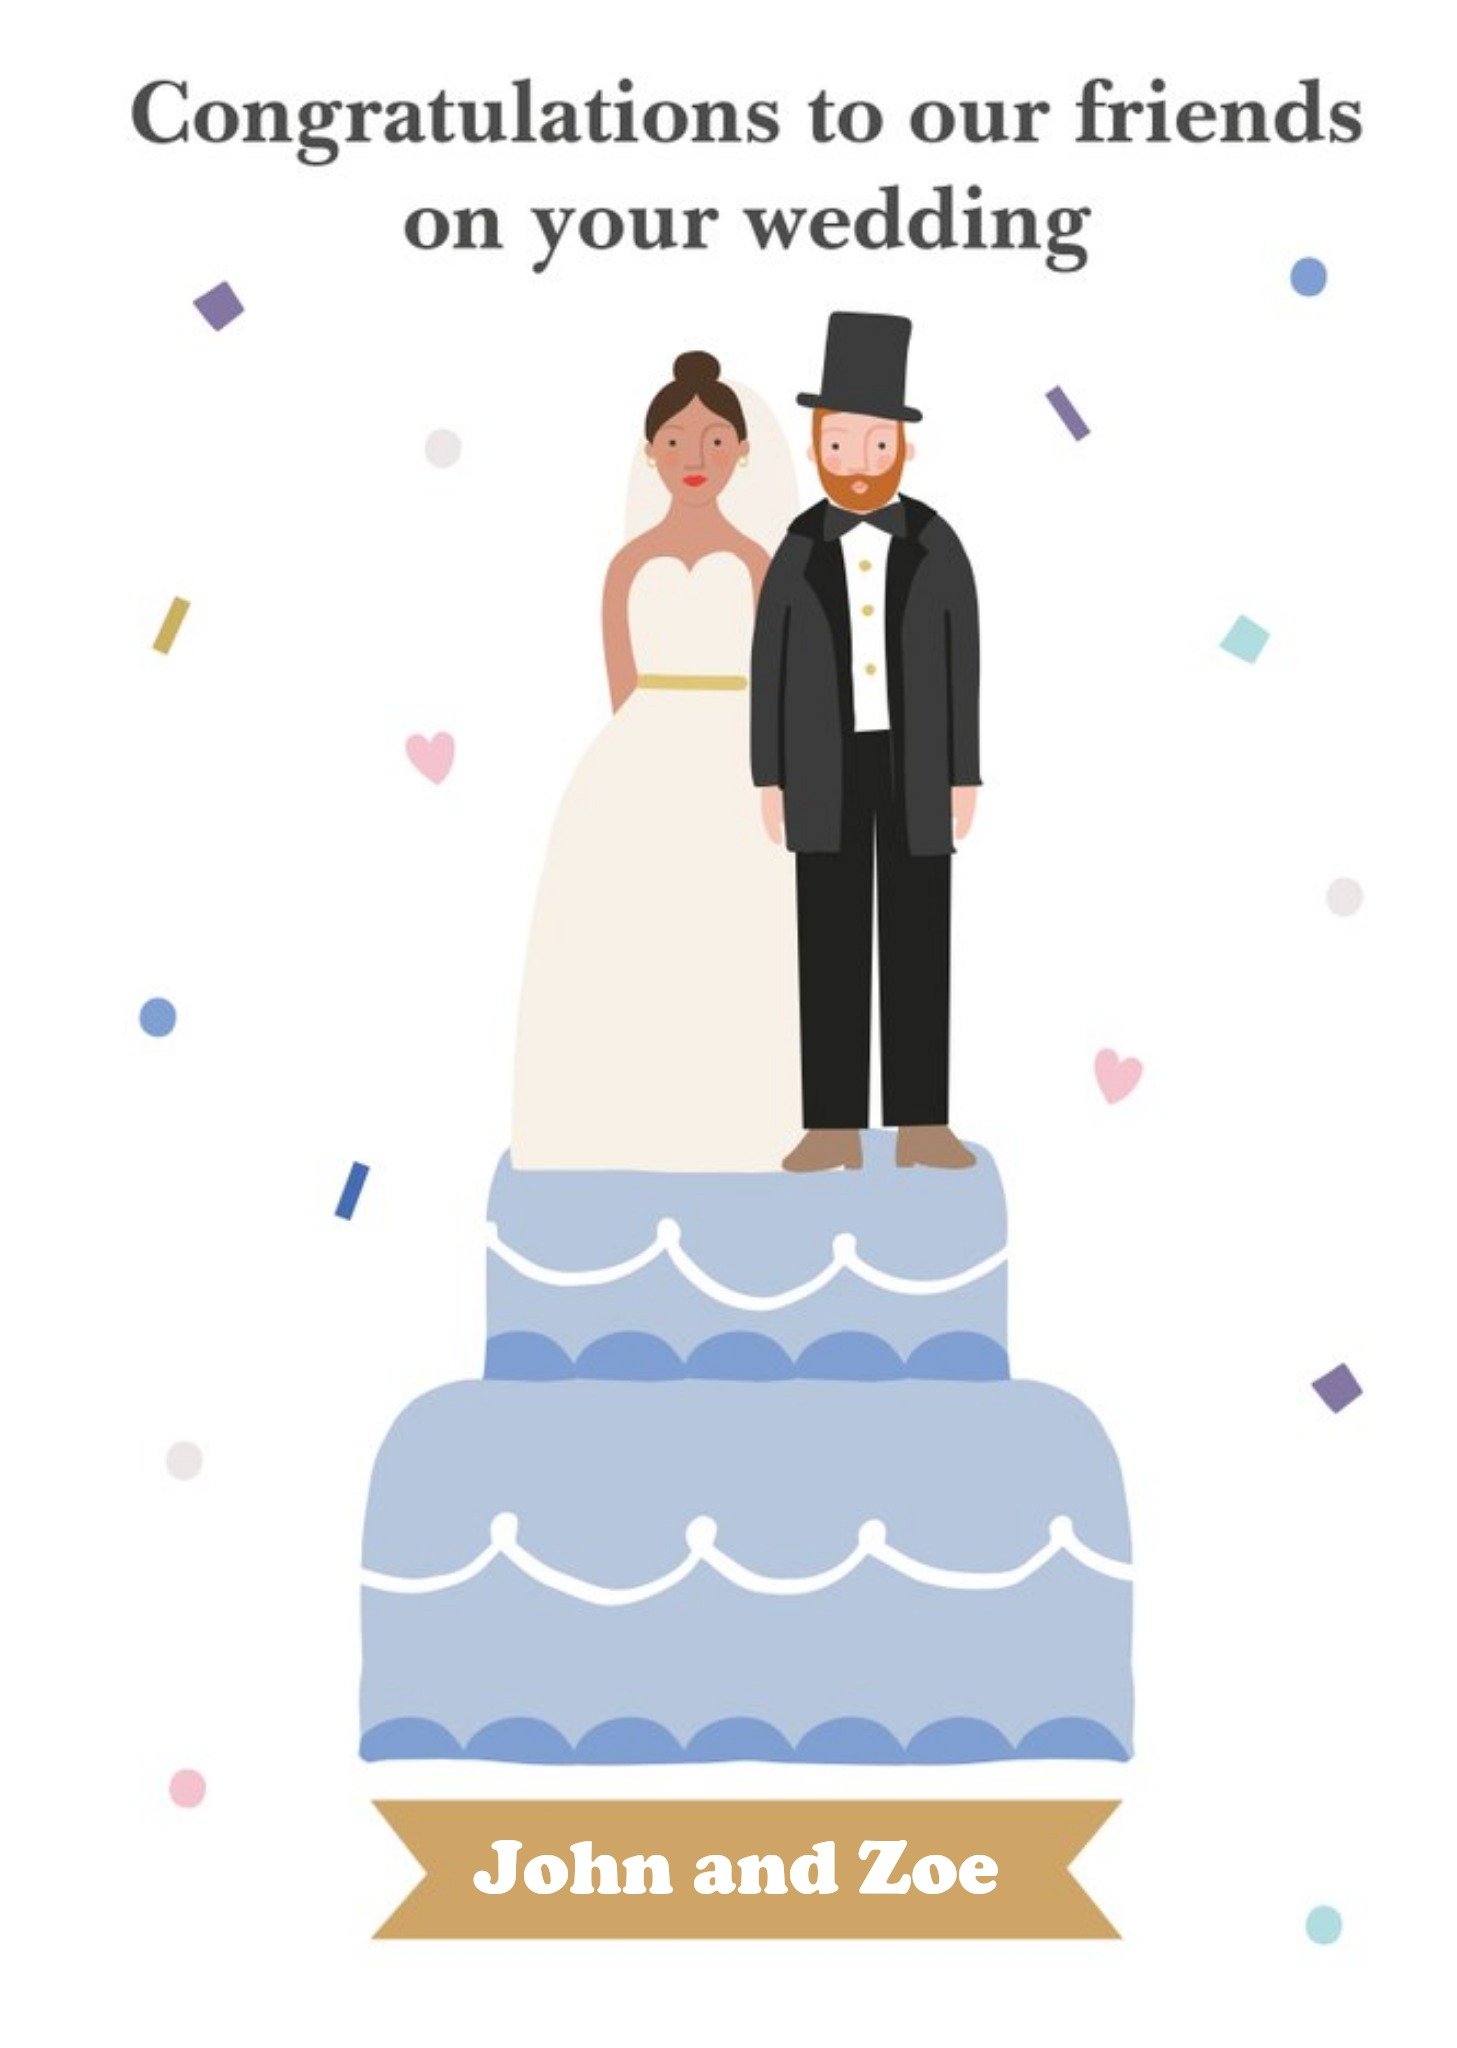 Moonpig Illustration Of Figurines On A Wedding Cake On Your Wedding Day Congratulations Card Ecard